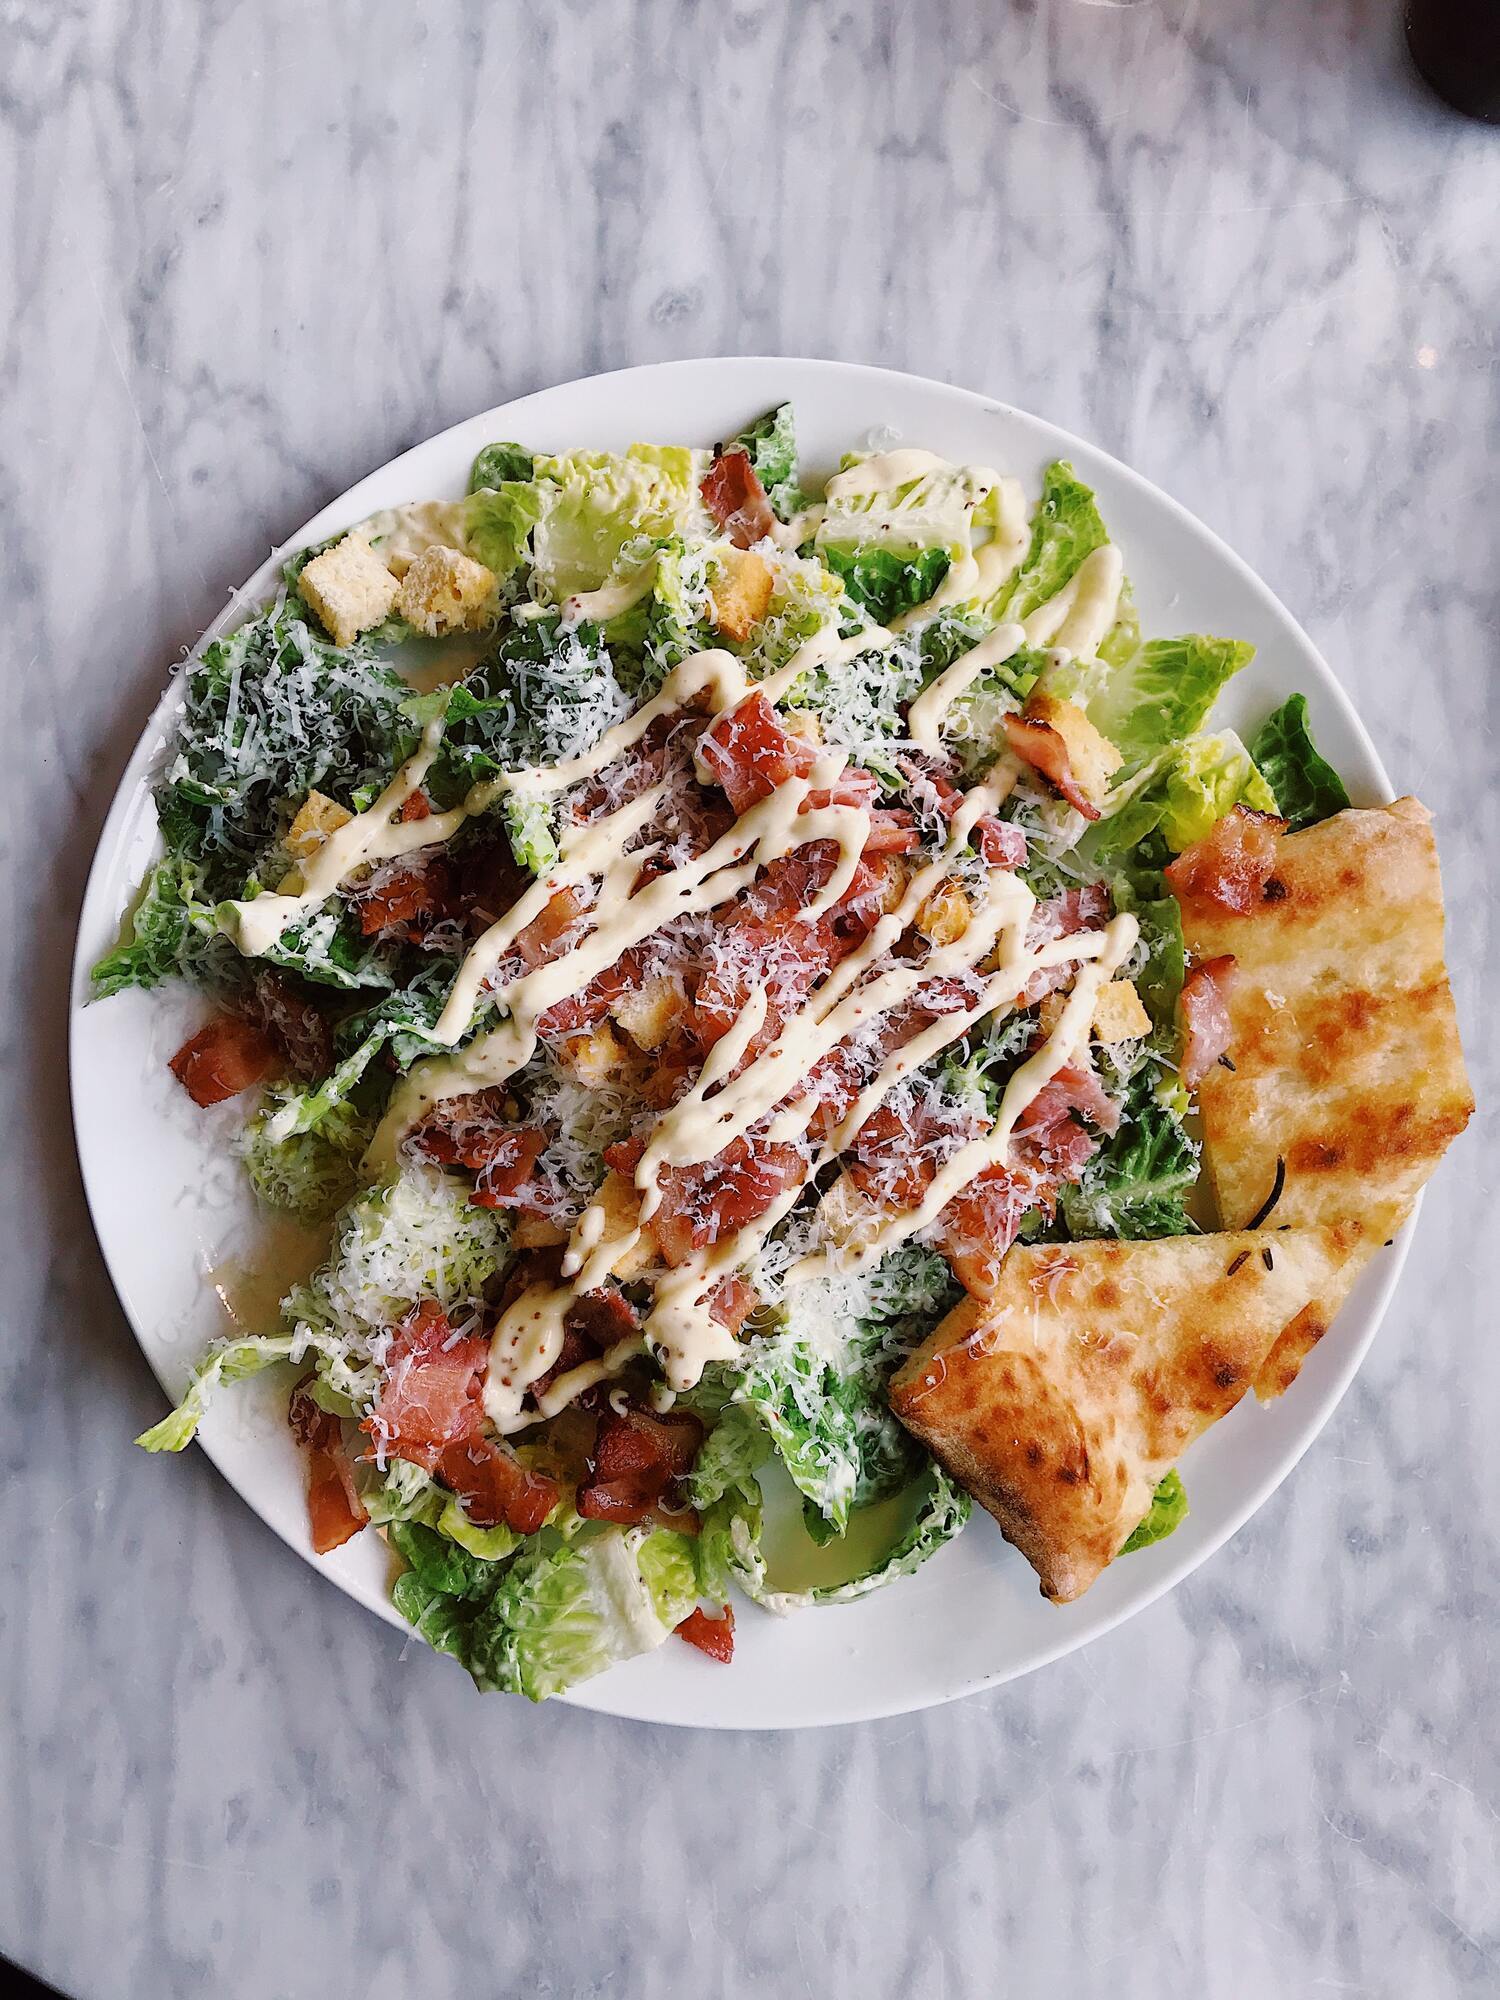 How to make delicious Caesar salad at home